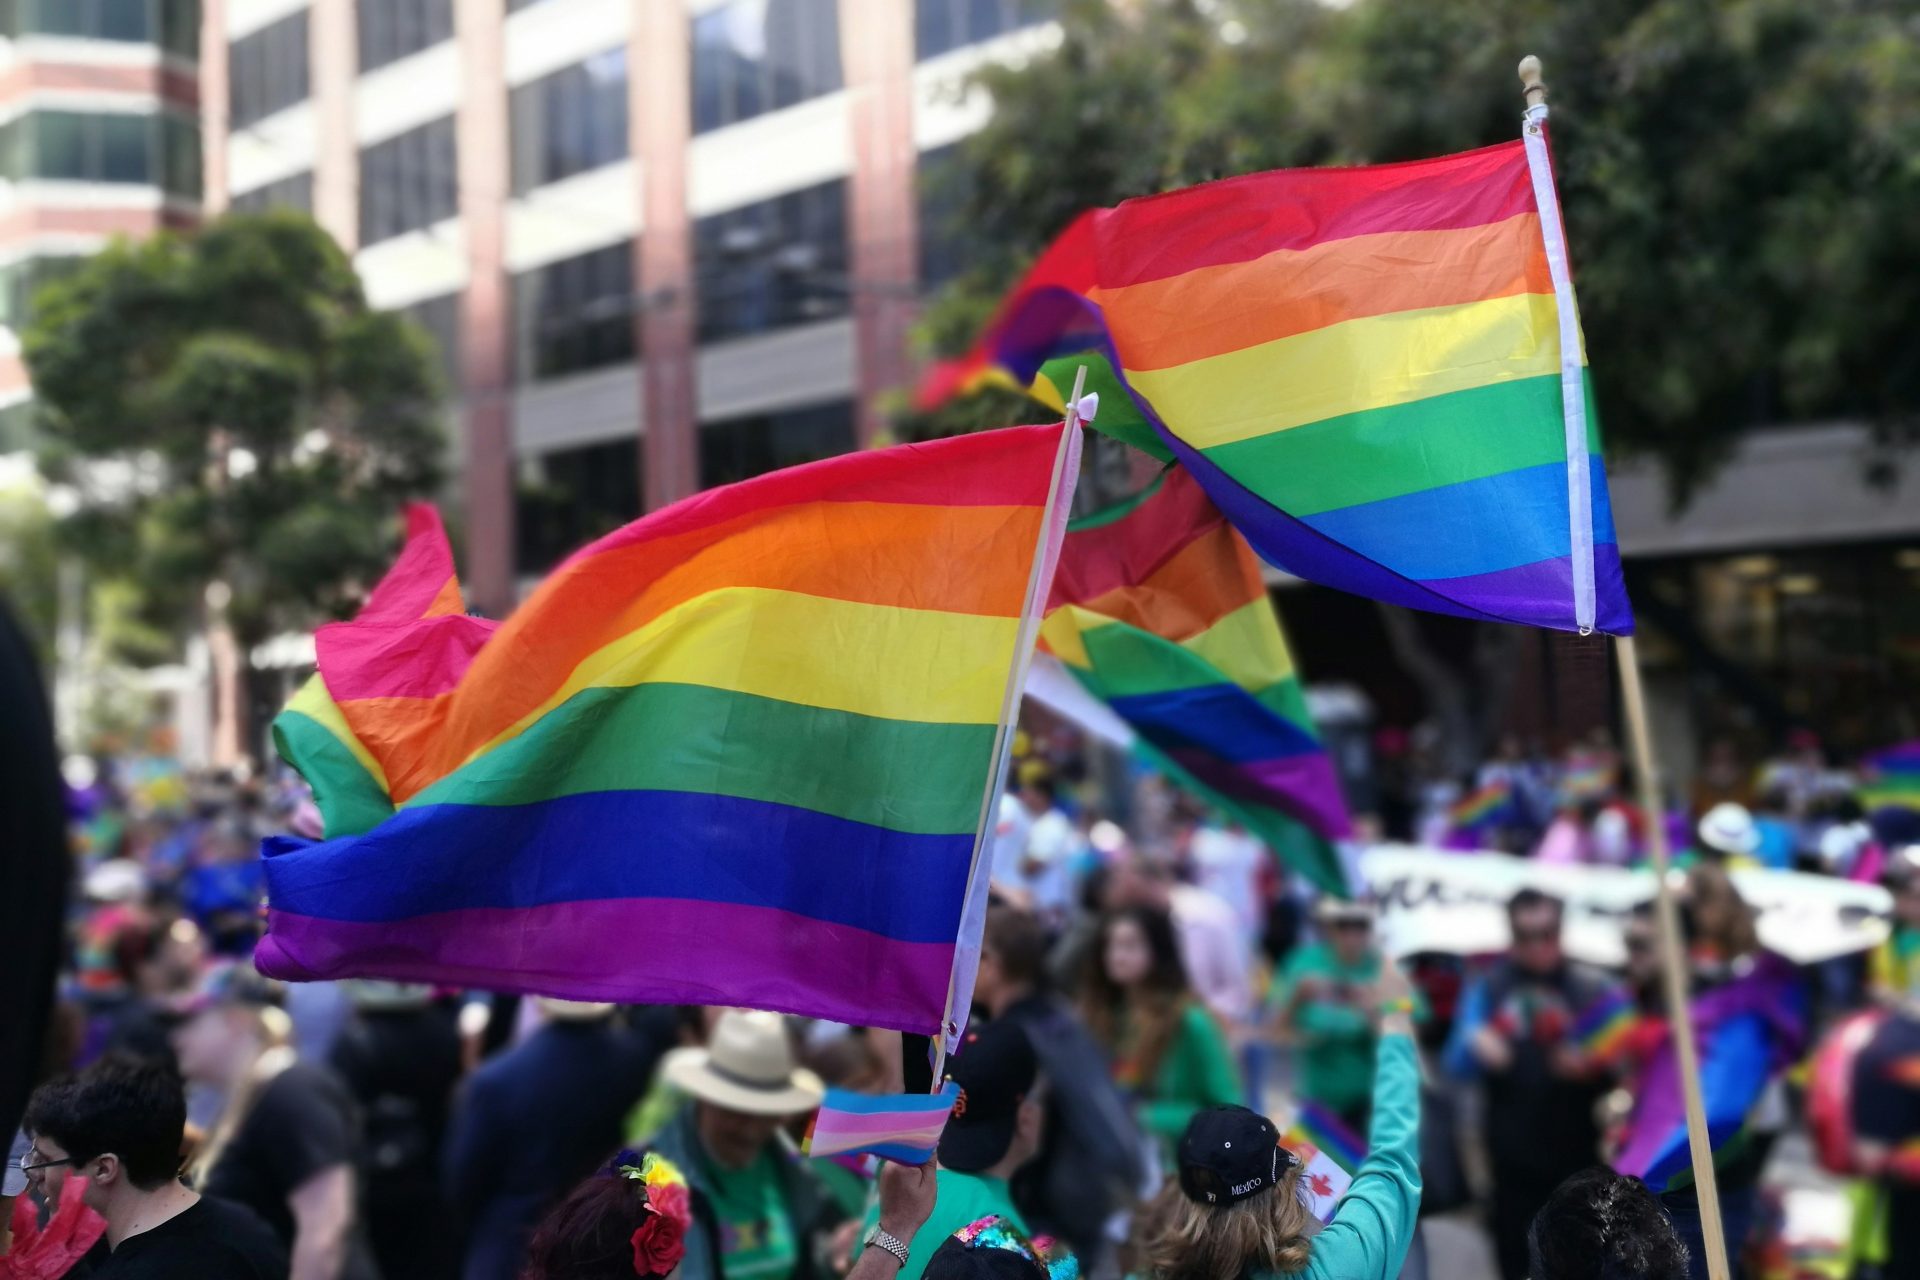 <p>The US authorities inform those who go to the various LGBTQ+ pride celebrations held around the world to take precautions, presumably due to the increase in hate crimes. However, they do not advise against any specific destination in this area.</p> <p>Image: yy / Unsplash</p>